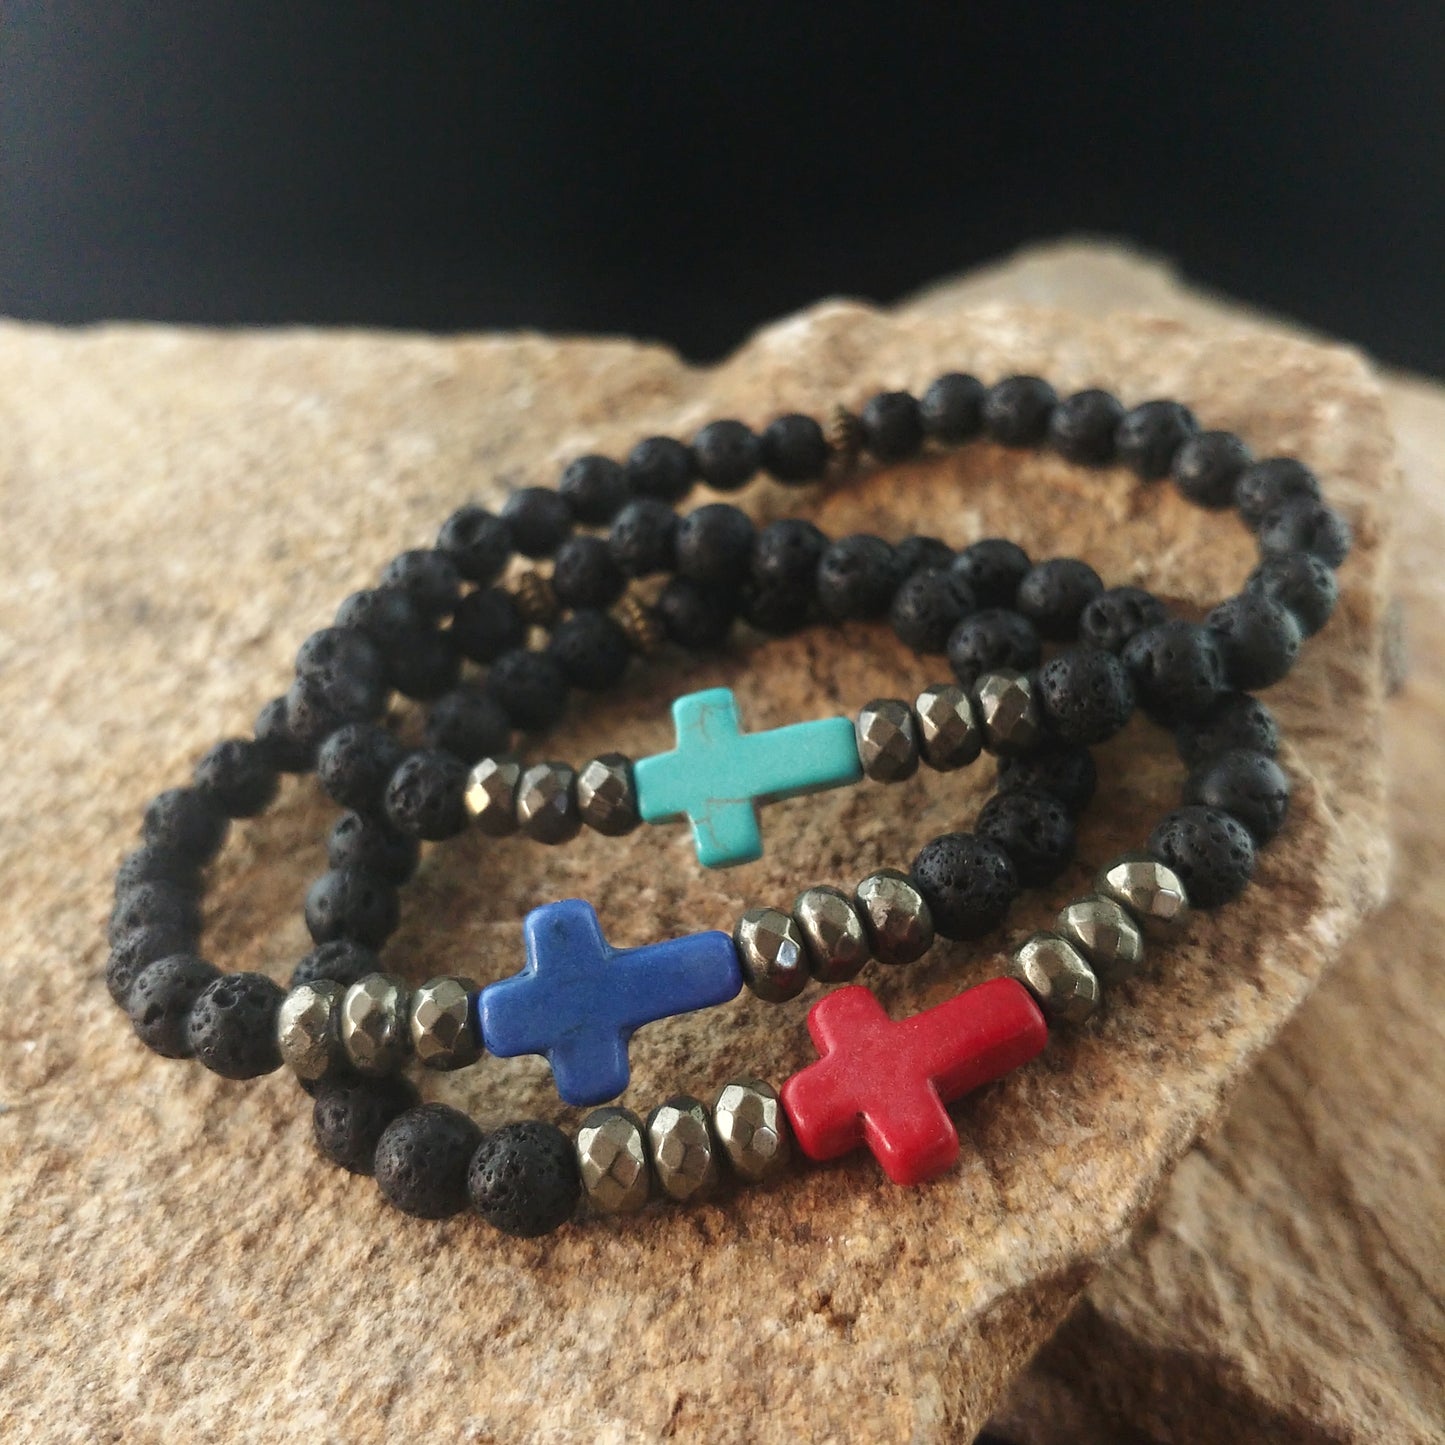 Three bracelets with cross center-piece sitting on top of one another. Below them is a bright brown stone display. All the bracelets have dark black lava beads, and bronze colored spacers beads. In the middle they all have a cross. The bottom bracelet has a red cross. The middle bracelet has a dark blue colored cross. The top bracelet has a turquoise colored cross.